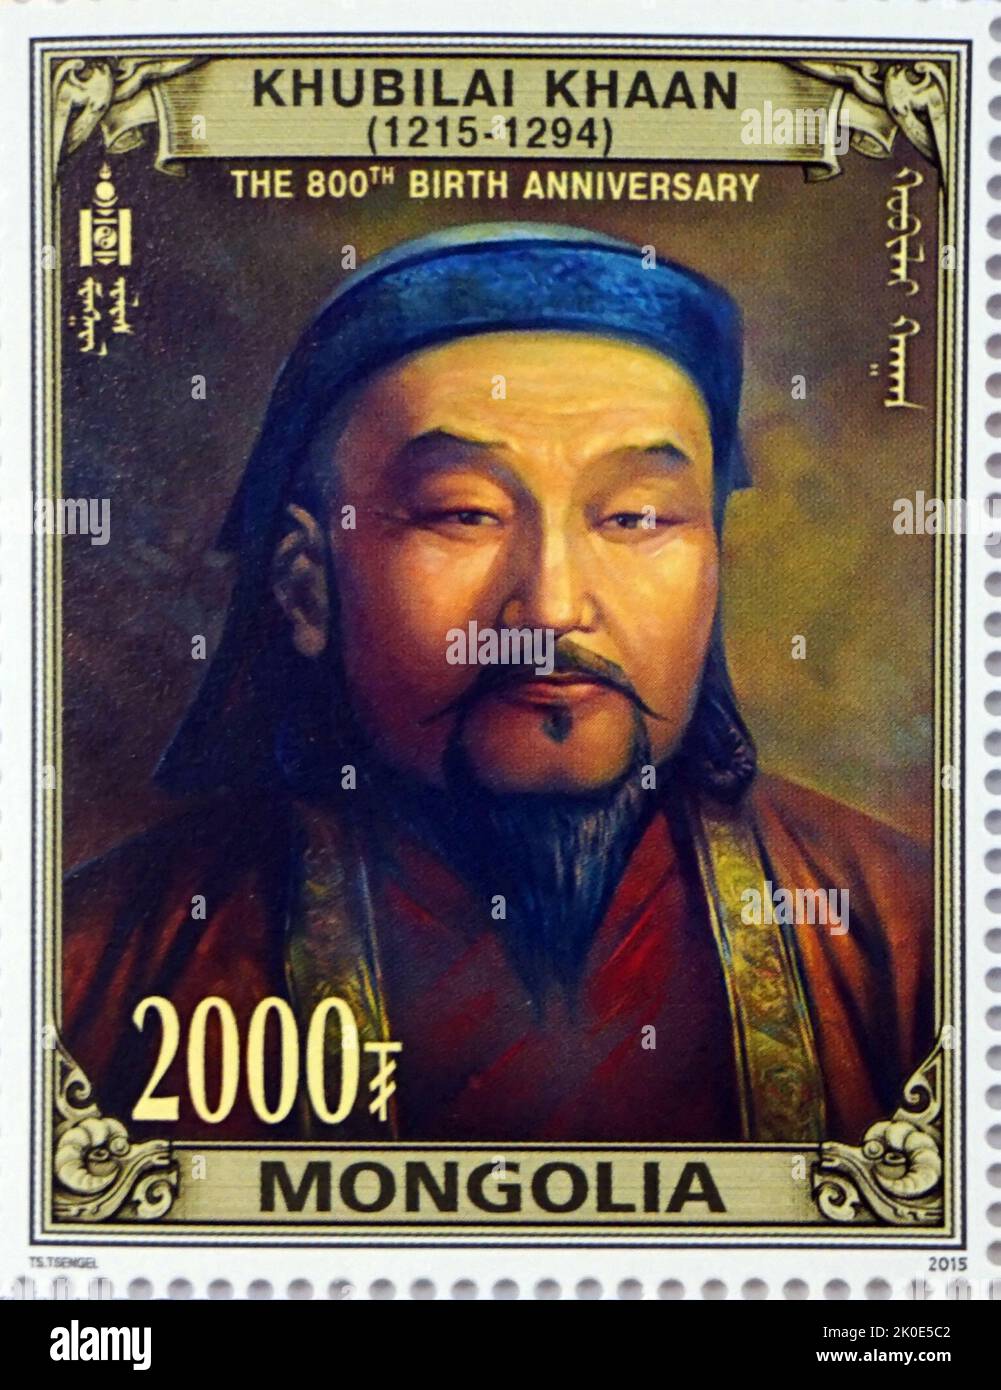 Genghis Khan (c.1158 - 1227), born Temujin, the founder and first Great Khan (Emperor) of the Mongol Empire, which became the largest contiguous empire in history after his death. He came to power by uniting many of the nomadic tribes of north east Asia. Stock Photo